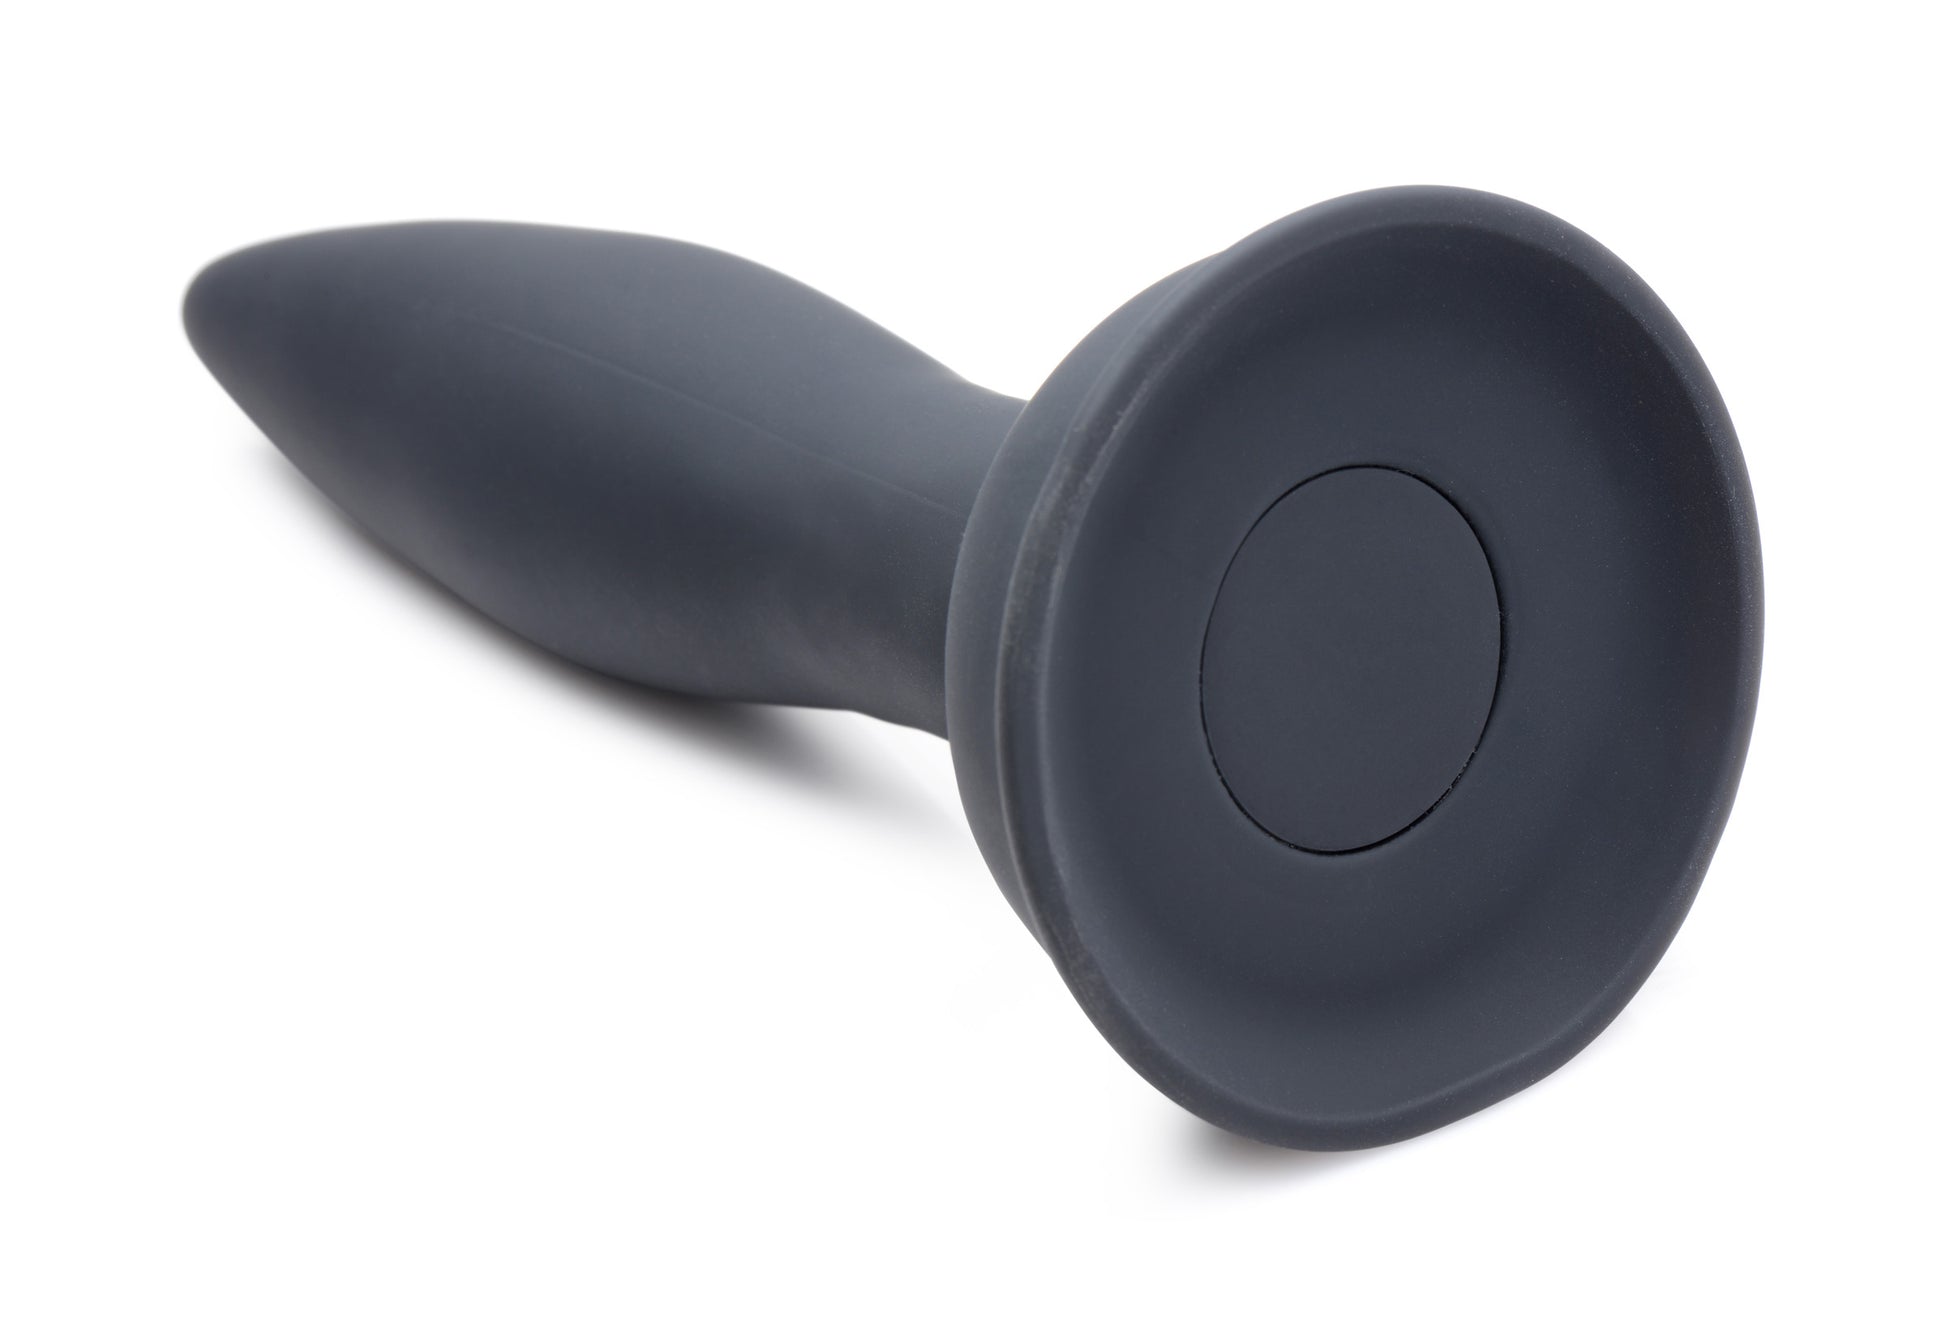 Turbo Ass-Spinner Silicone Anal Plug with Remote Control - UABDSM